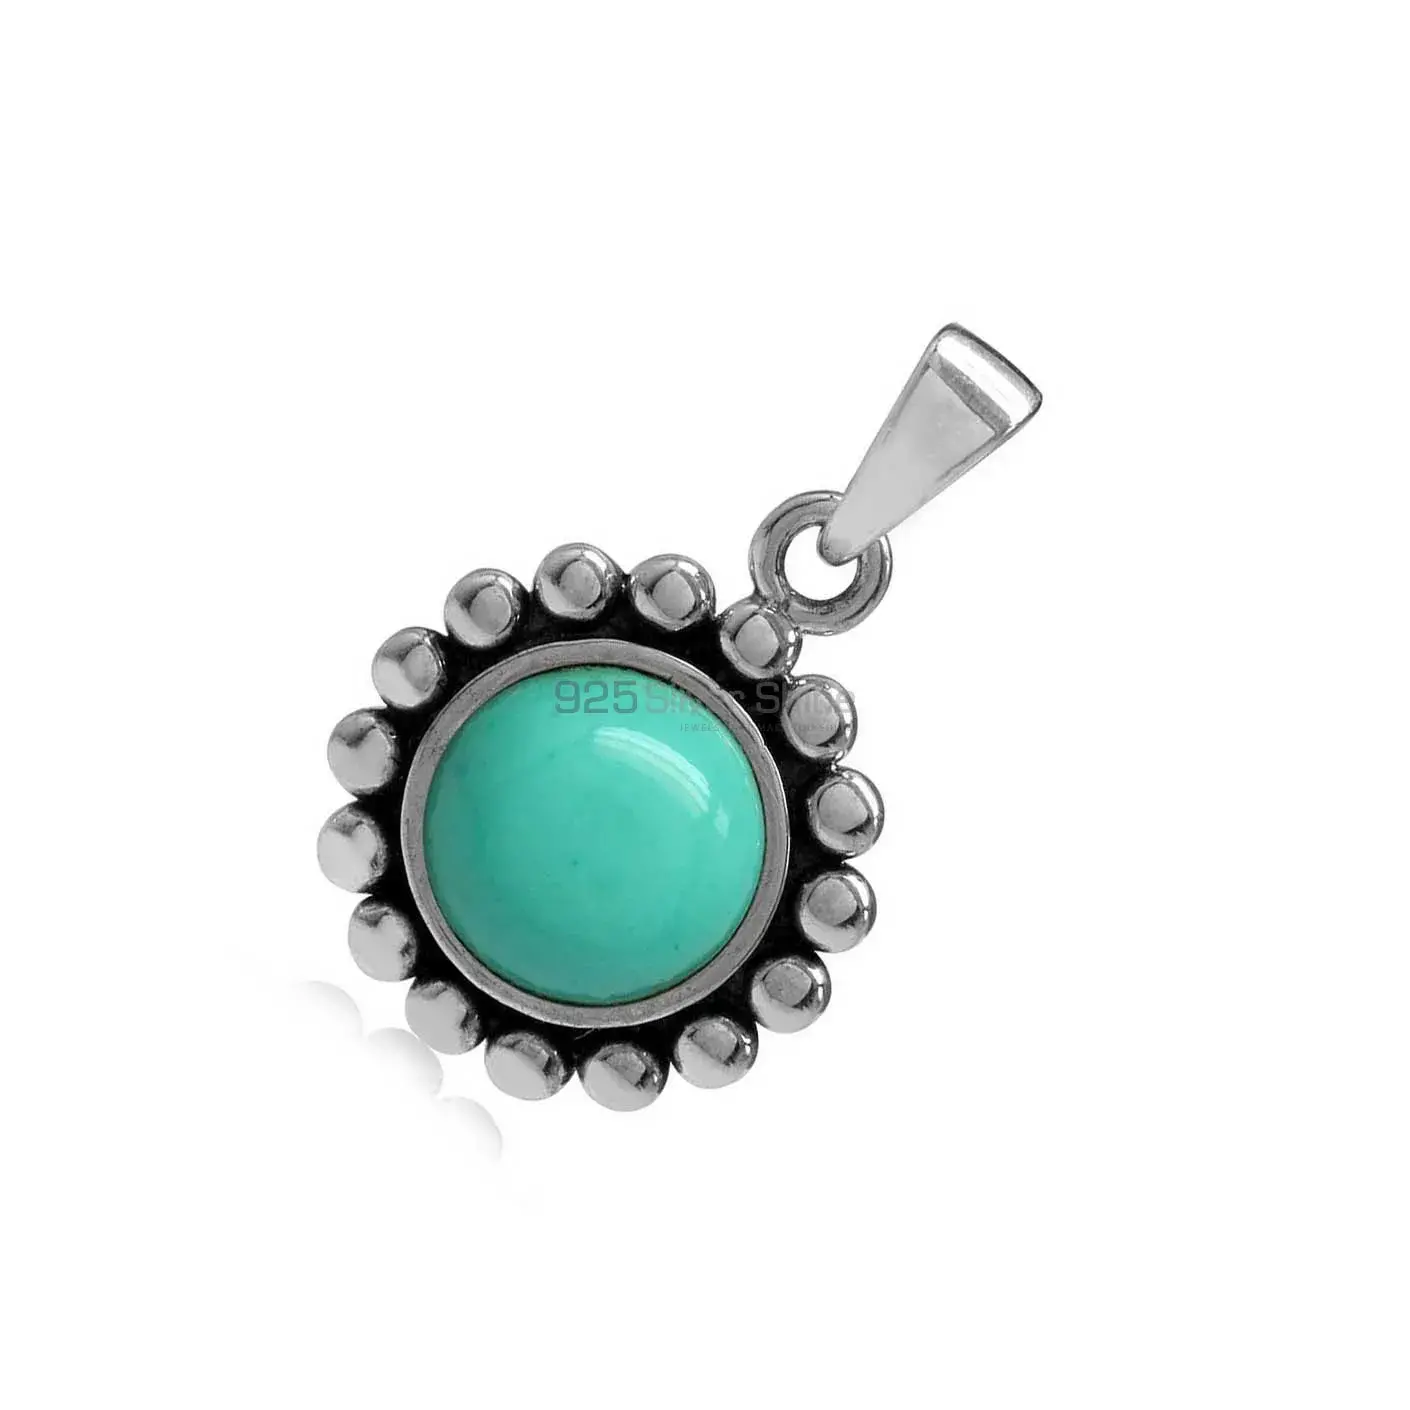 Best Price Solid Sterling Silver Handmade Pendants In Turquoise Gemstone Jewelry 925SP02-4_1